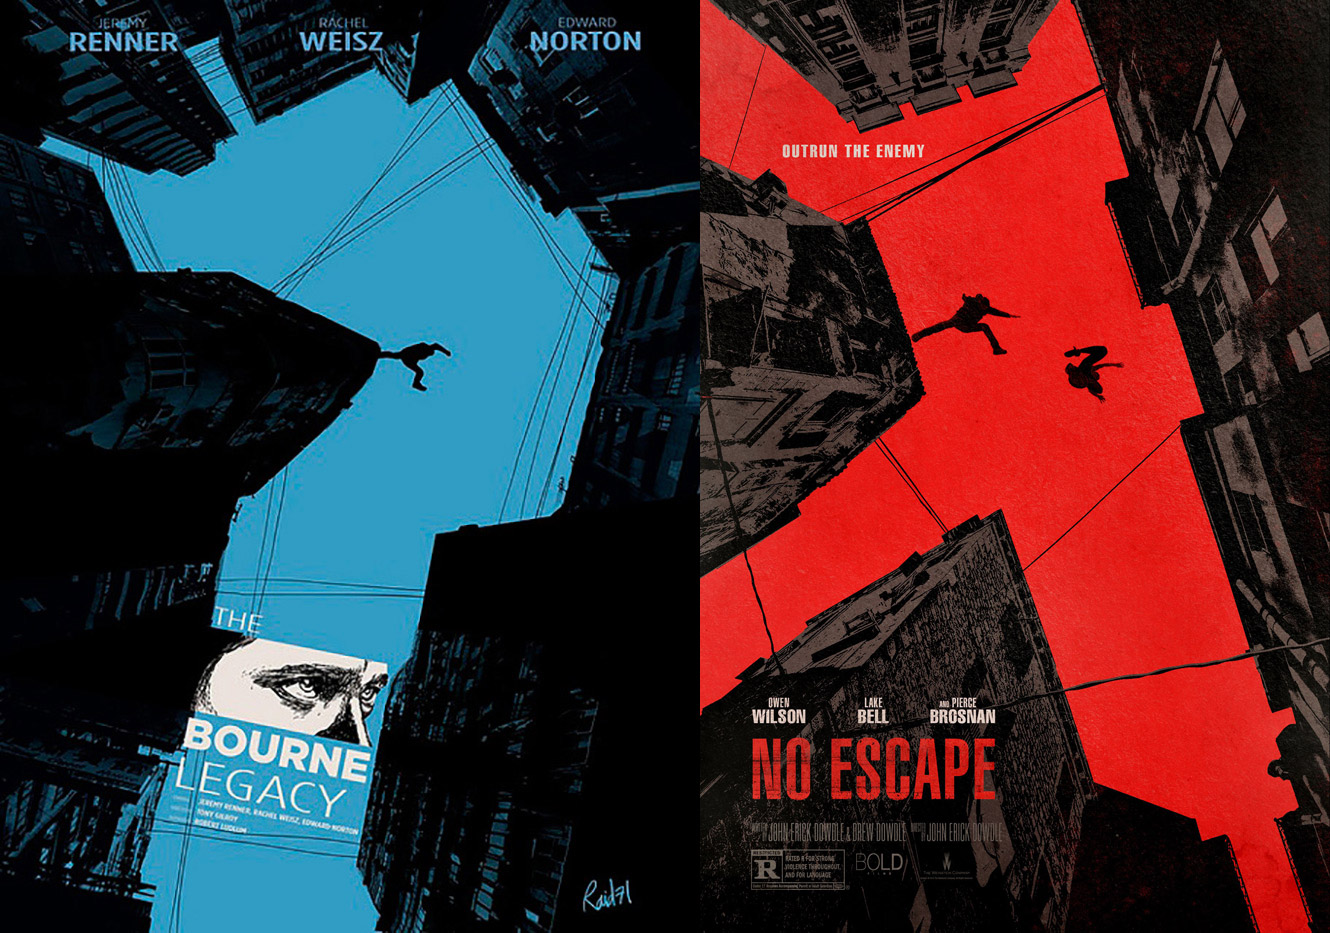 Raid71’s artwork for _The Bourne Legacy_ and Cold Open’s artwork for _No Escape,_ side by side comparison. The Bourne Legacy © 2012 Universal Pictures; No Escape © 2015 The Weinstein Company – Click the image to see the _No Escape_ poster on IMPAwards.